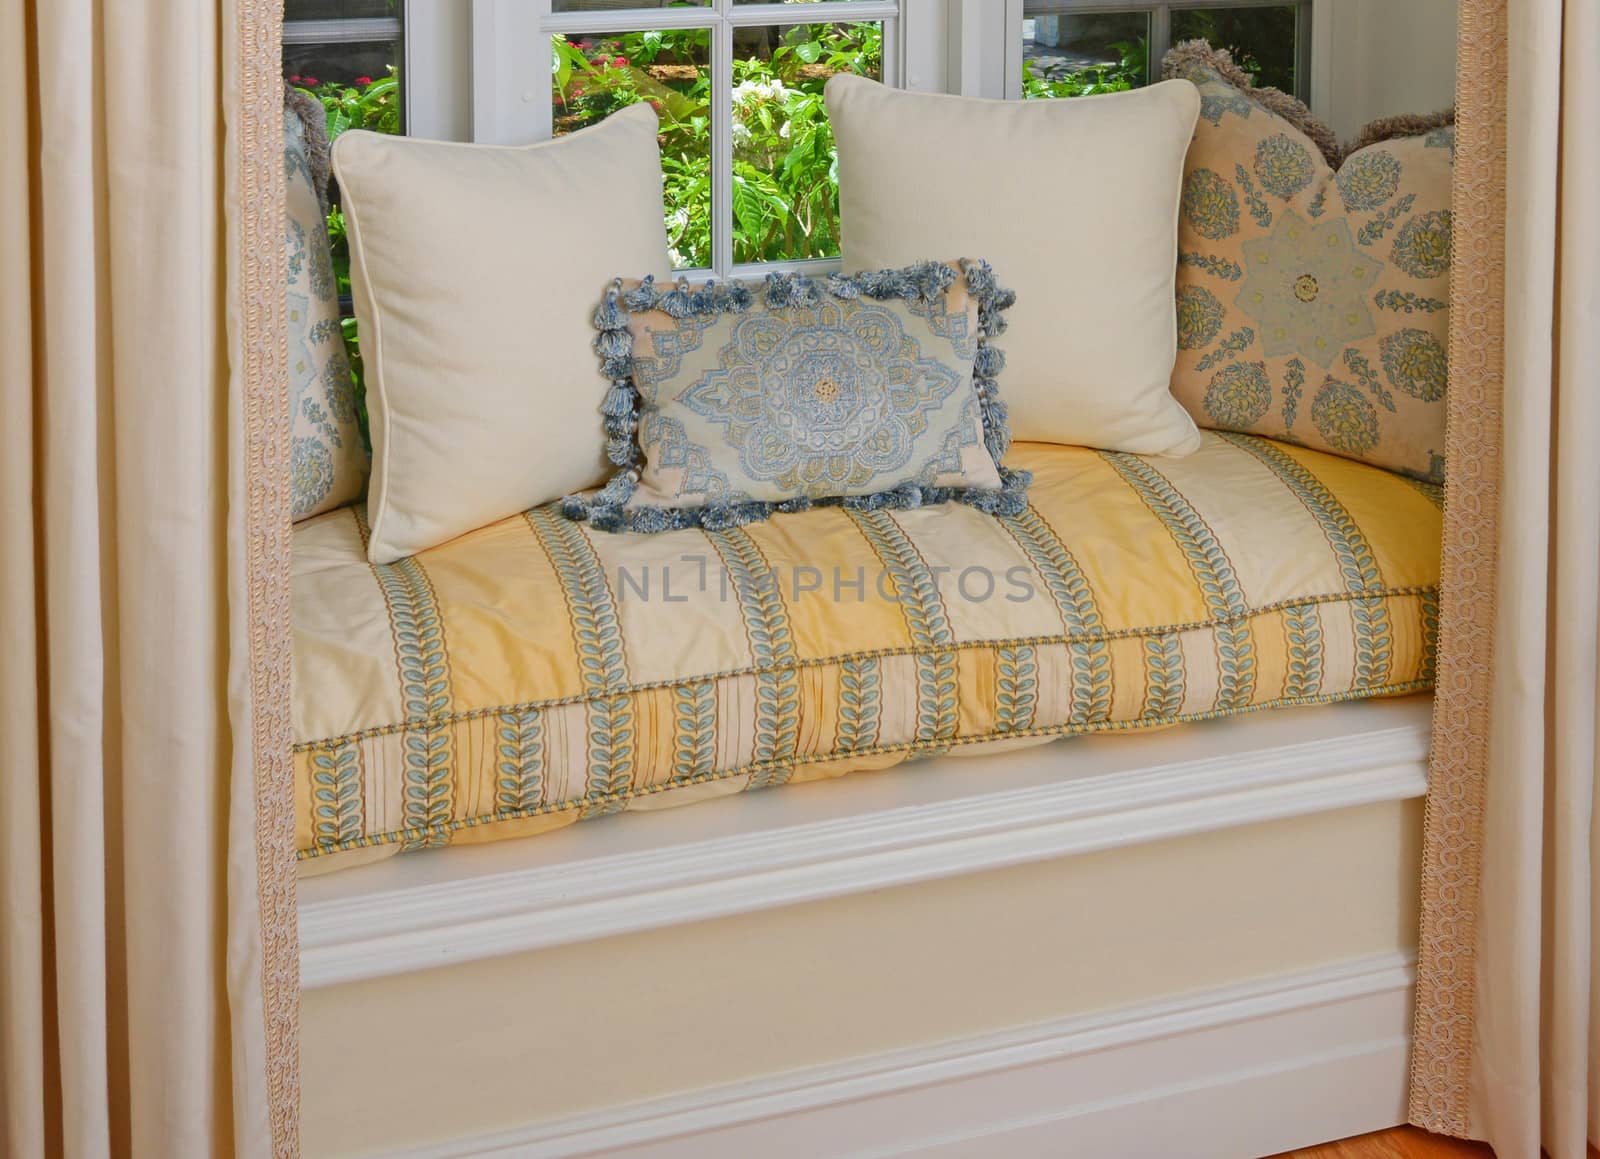 A seating area in a bay window with decorative pillows and cushions in a window seat

